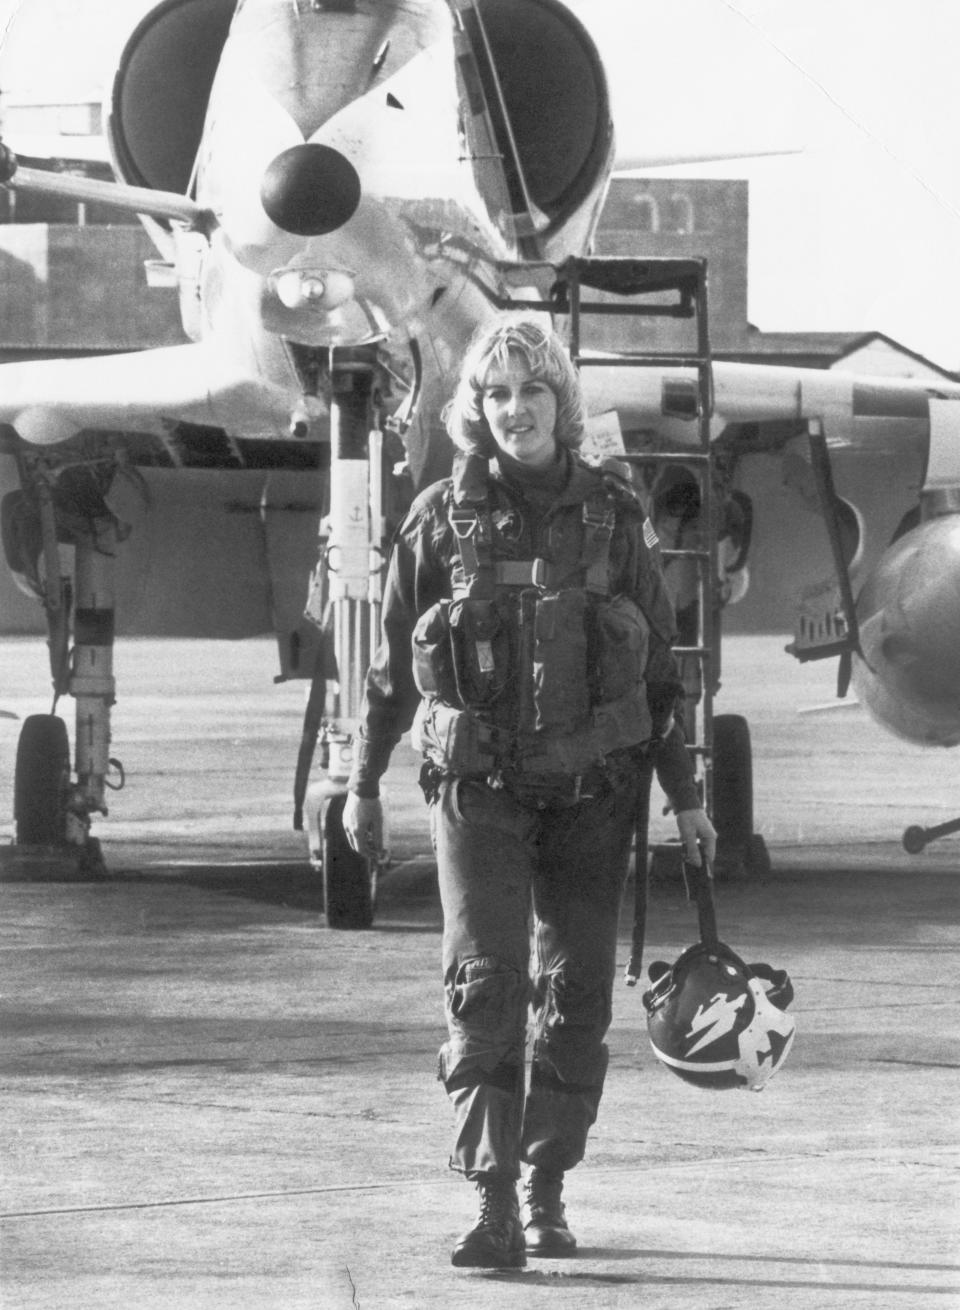 Lt. (J.G.) Mary Louise Jorgensen was the first woman tactical jet pilot to be assigned to Miramar Naval Air Station at San Diego.